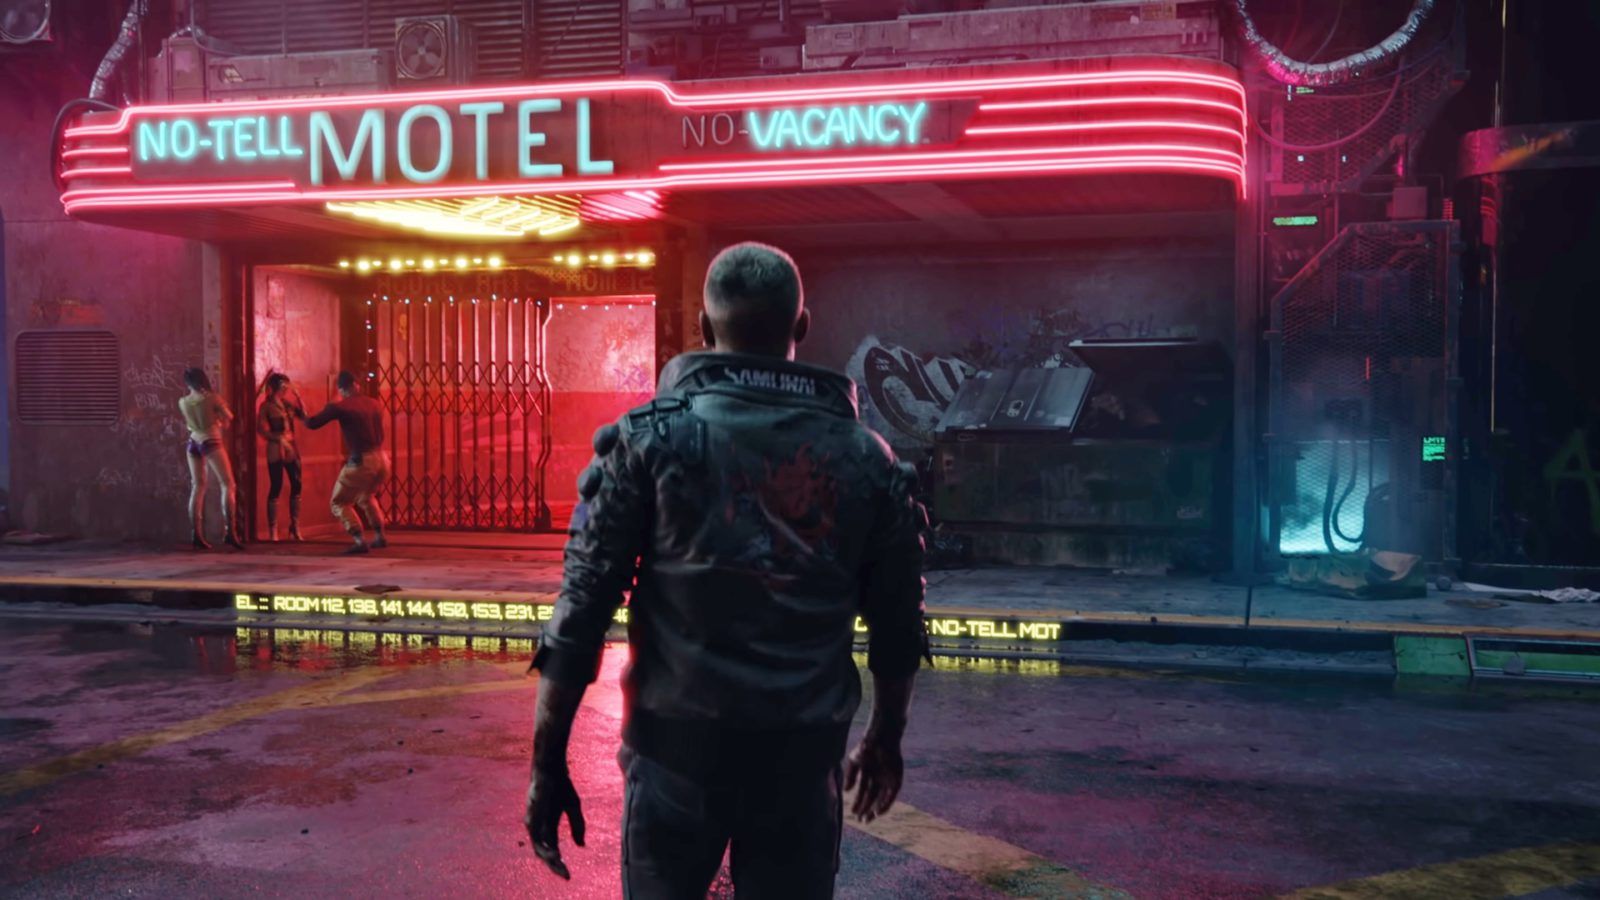 Cyberpunk 2077 Developer Shows the Magnitude of Threats he Received